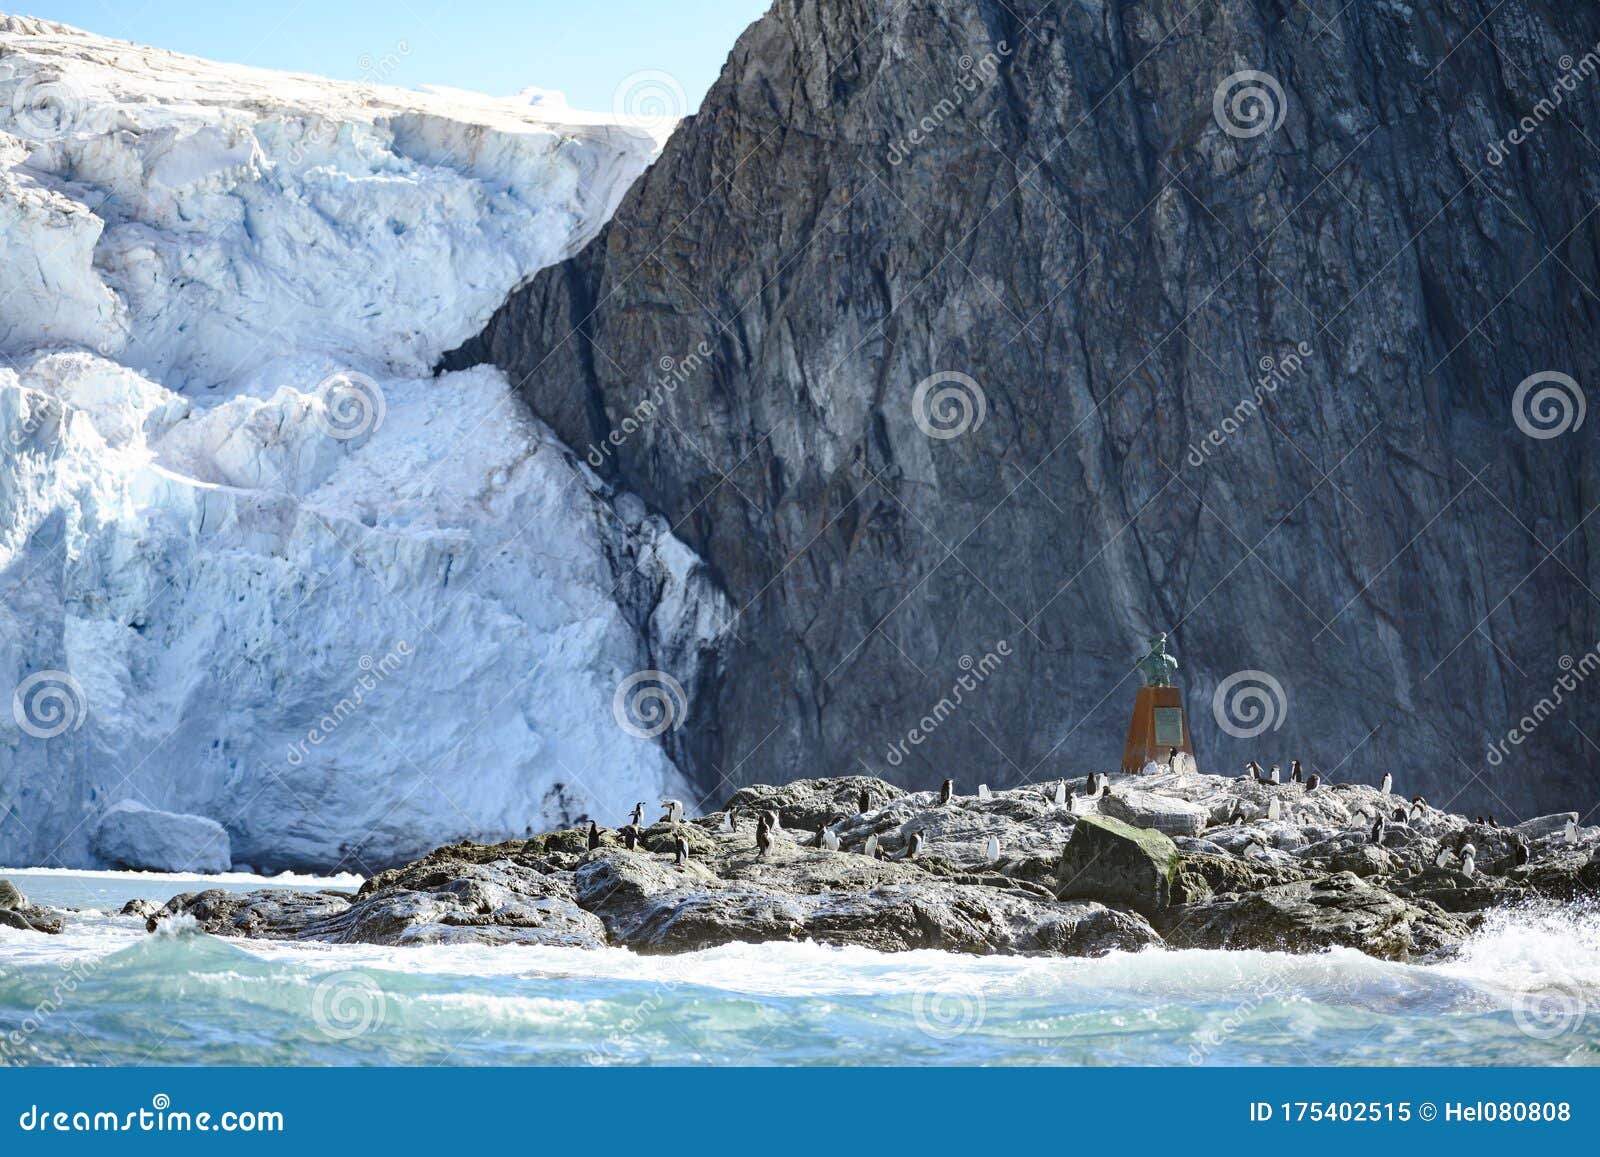 majs Tage en risiko Profet Point Wild at Elephant Island, Where Sir Ernest Shackleton Let His  Shipwrecked Men until Captain Pardo Came To Rescue Them. Stock Image -  Image of shipwrecked, statue: 175402515